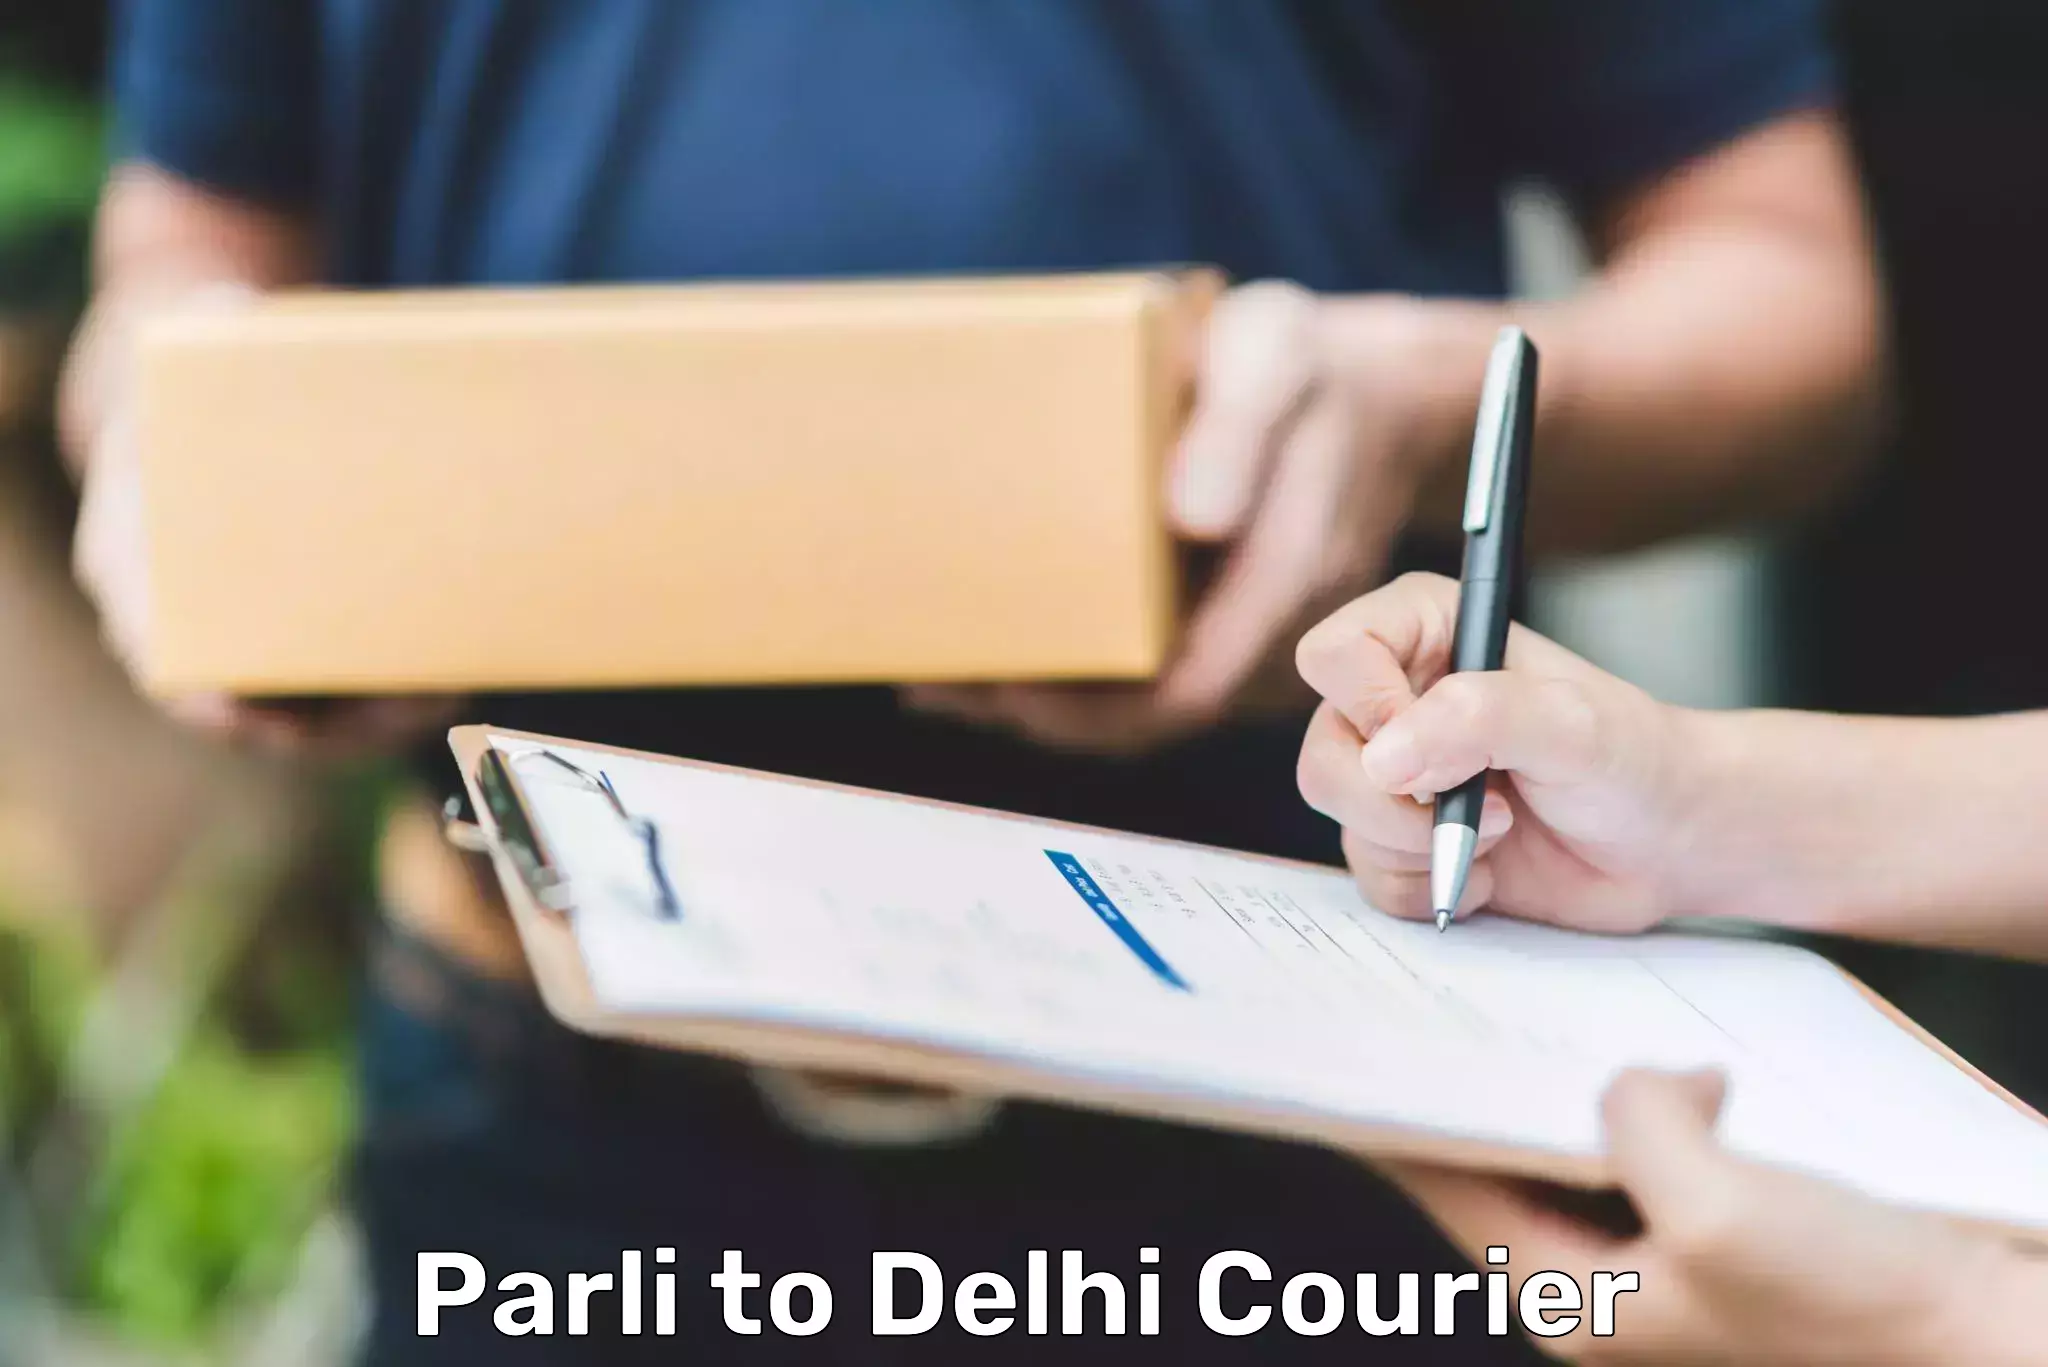 Fast parcel dispatch Parli to Lodhi Road